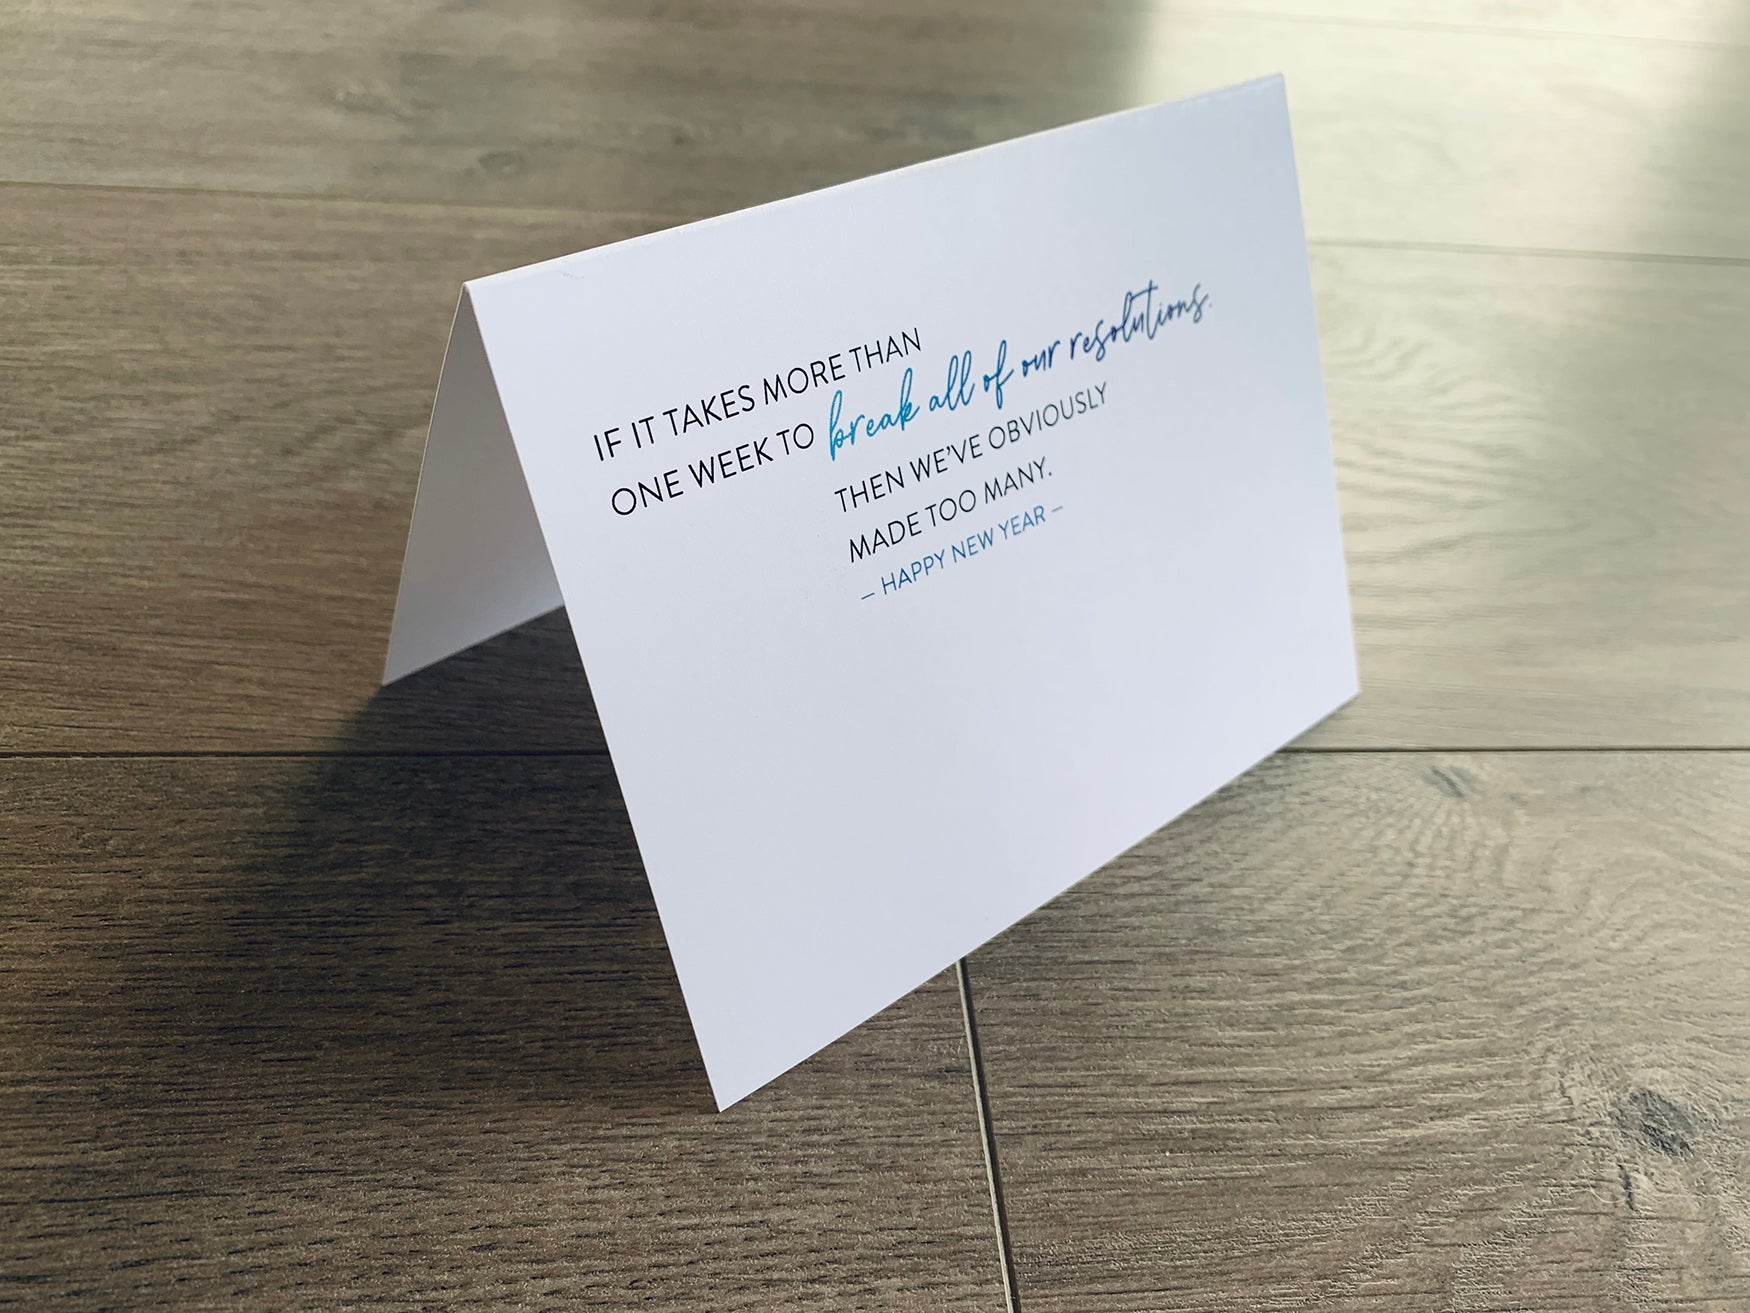 A white folded notecard stands on a gray wood floor. The card says, "If it takes more than one week to break all of our resolutions, then we've obviously made too many."